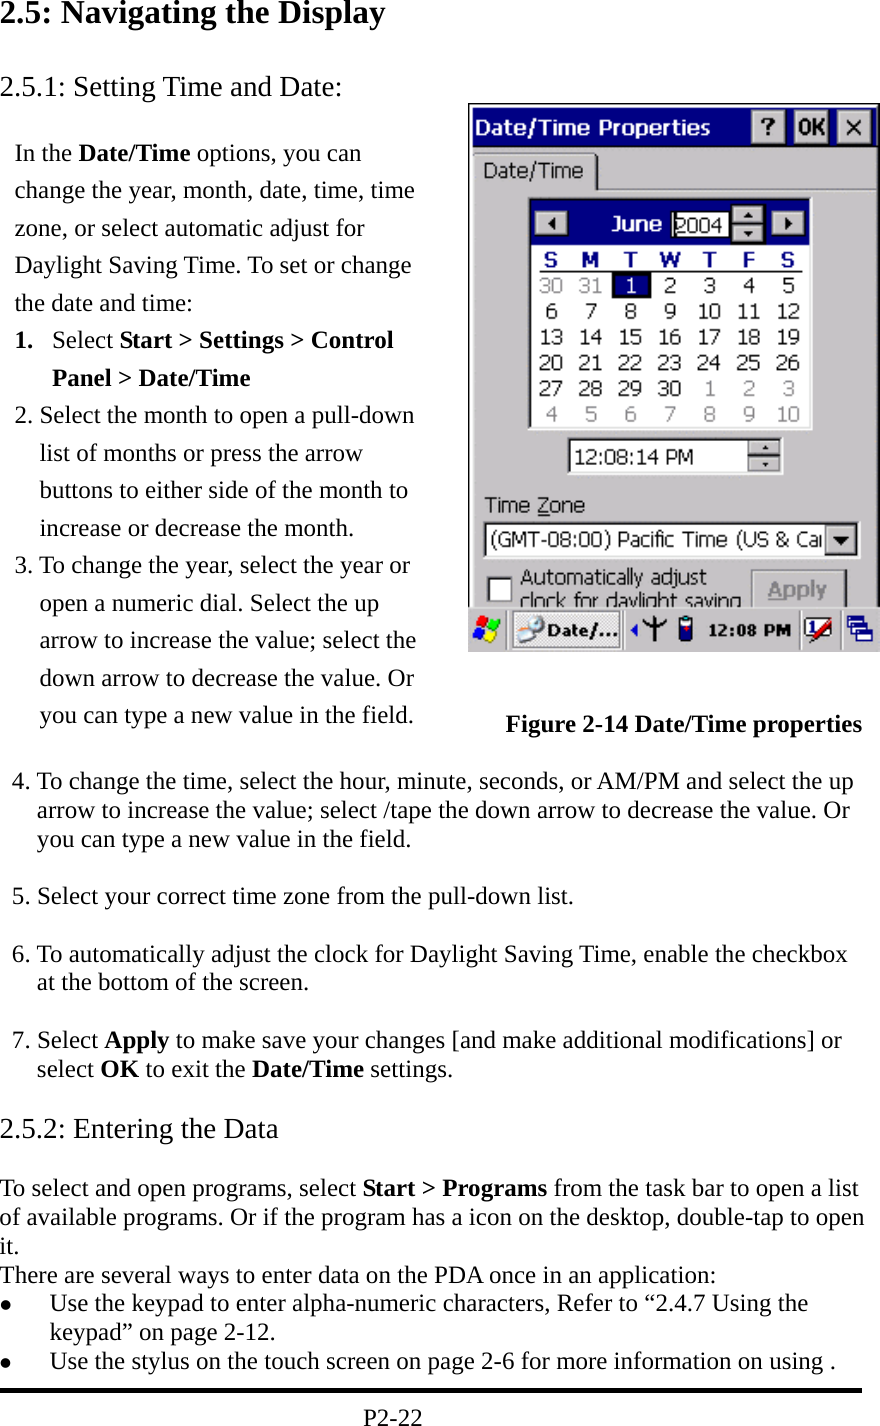 2.5: Navigating the Display  2.5.1: Setting Time and Date:                    Figure 2-14 Date/Time properties     4. To change the time, select the hour, minute, seconds, or AM/PM and select the up arrow to increase the value; select /tape the down arrow to decrease the value. Or you can type a new value in the field.    5. Select your correct time zone from the pull-down list.    6. To automatically adjust the clock for Daylight Saving Time, enable the checkbox at the bottom of the screen.   7. Select Apply to make save your changes [and make additional modifications] or select OK to exit the Date/Time settings.  2.5.2: Entering the Data  To select and open programs, select Start &gt; Programs from the task bar to open a list of available programs. Or if the program has a icon on the desktop, double-tap to open it. There are several ways to enter data on the PDA once in an application:   Use the keypad to enter alpha-numeric characters, Refer to “2.4.7 Using the keypad” on page 2-12.   Use the stylus on the touch screen on page 2-6 for more information on using .                                            P2-22 In the Date/Time options, you can change the year, month, date, time, time zone, or select automatic adjust for Daylight Saving Time. To set or change the date and time: 1.  Select Start &gt; Settings &gt; Control Panel &gt; Date/Time 2. Select the month to open a pull-down list of months or press the arrow buttons to either side of the month to increase or decrease the month. 3. To change the year, select the year or open a numeric dial. Select the up arrow to increase the value; select the down arrow to decrease the value. Or you can type a new value in the field. 